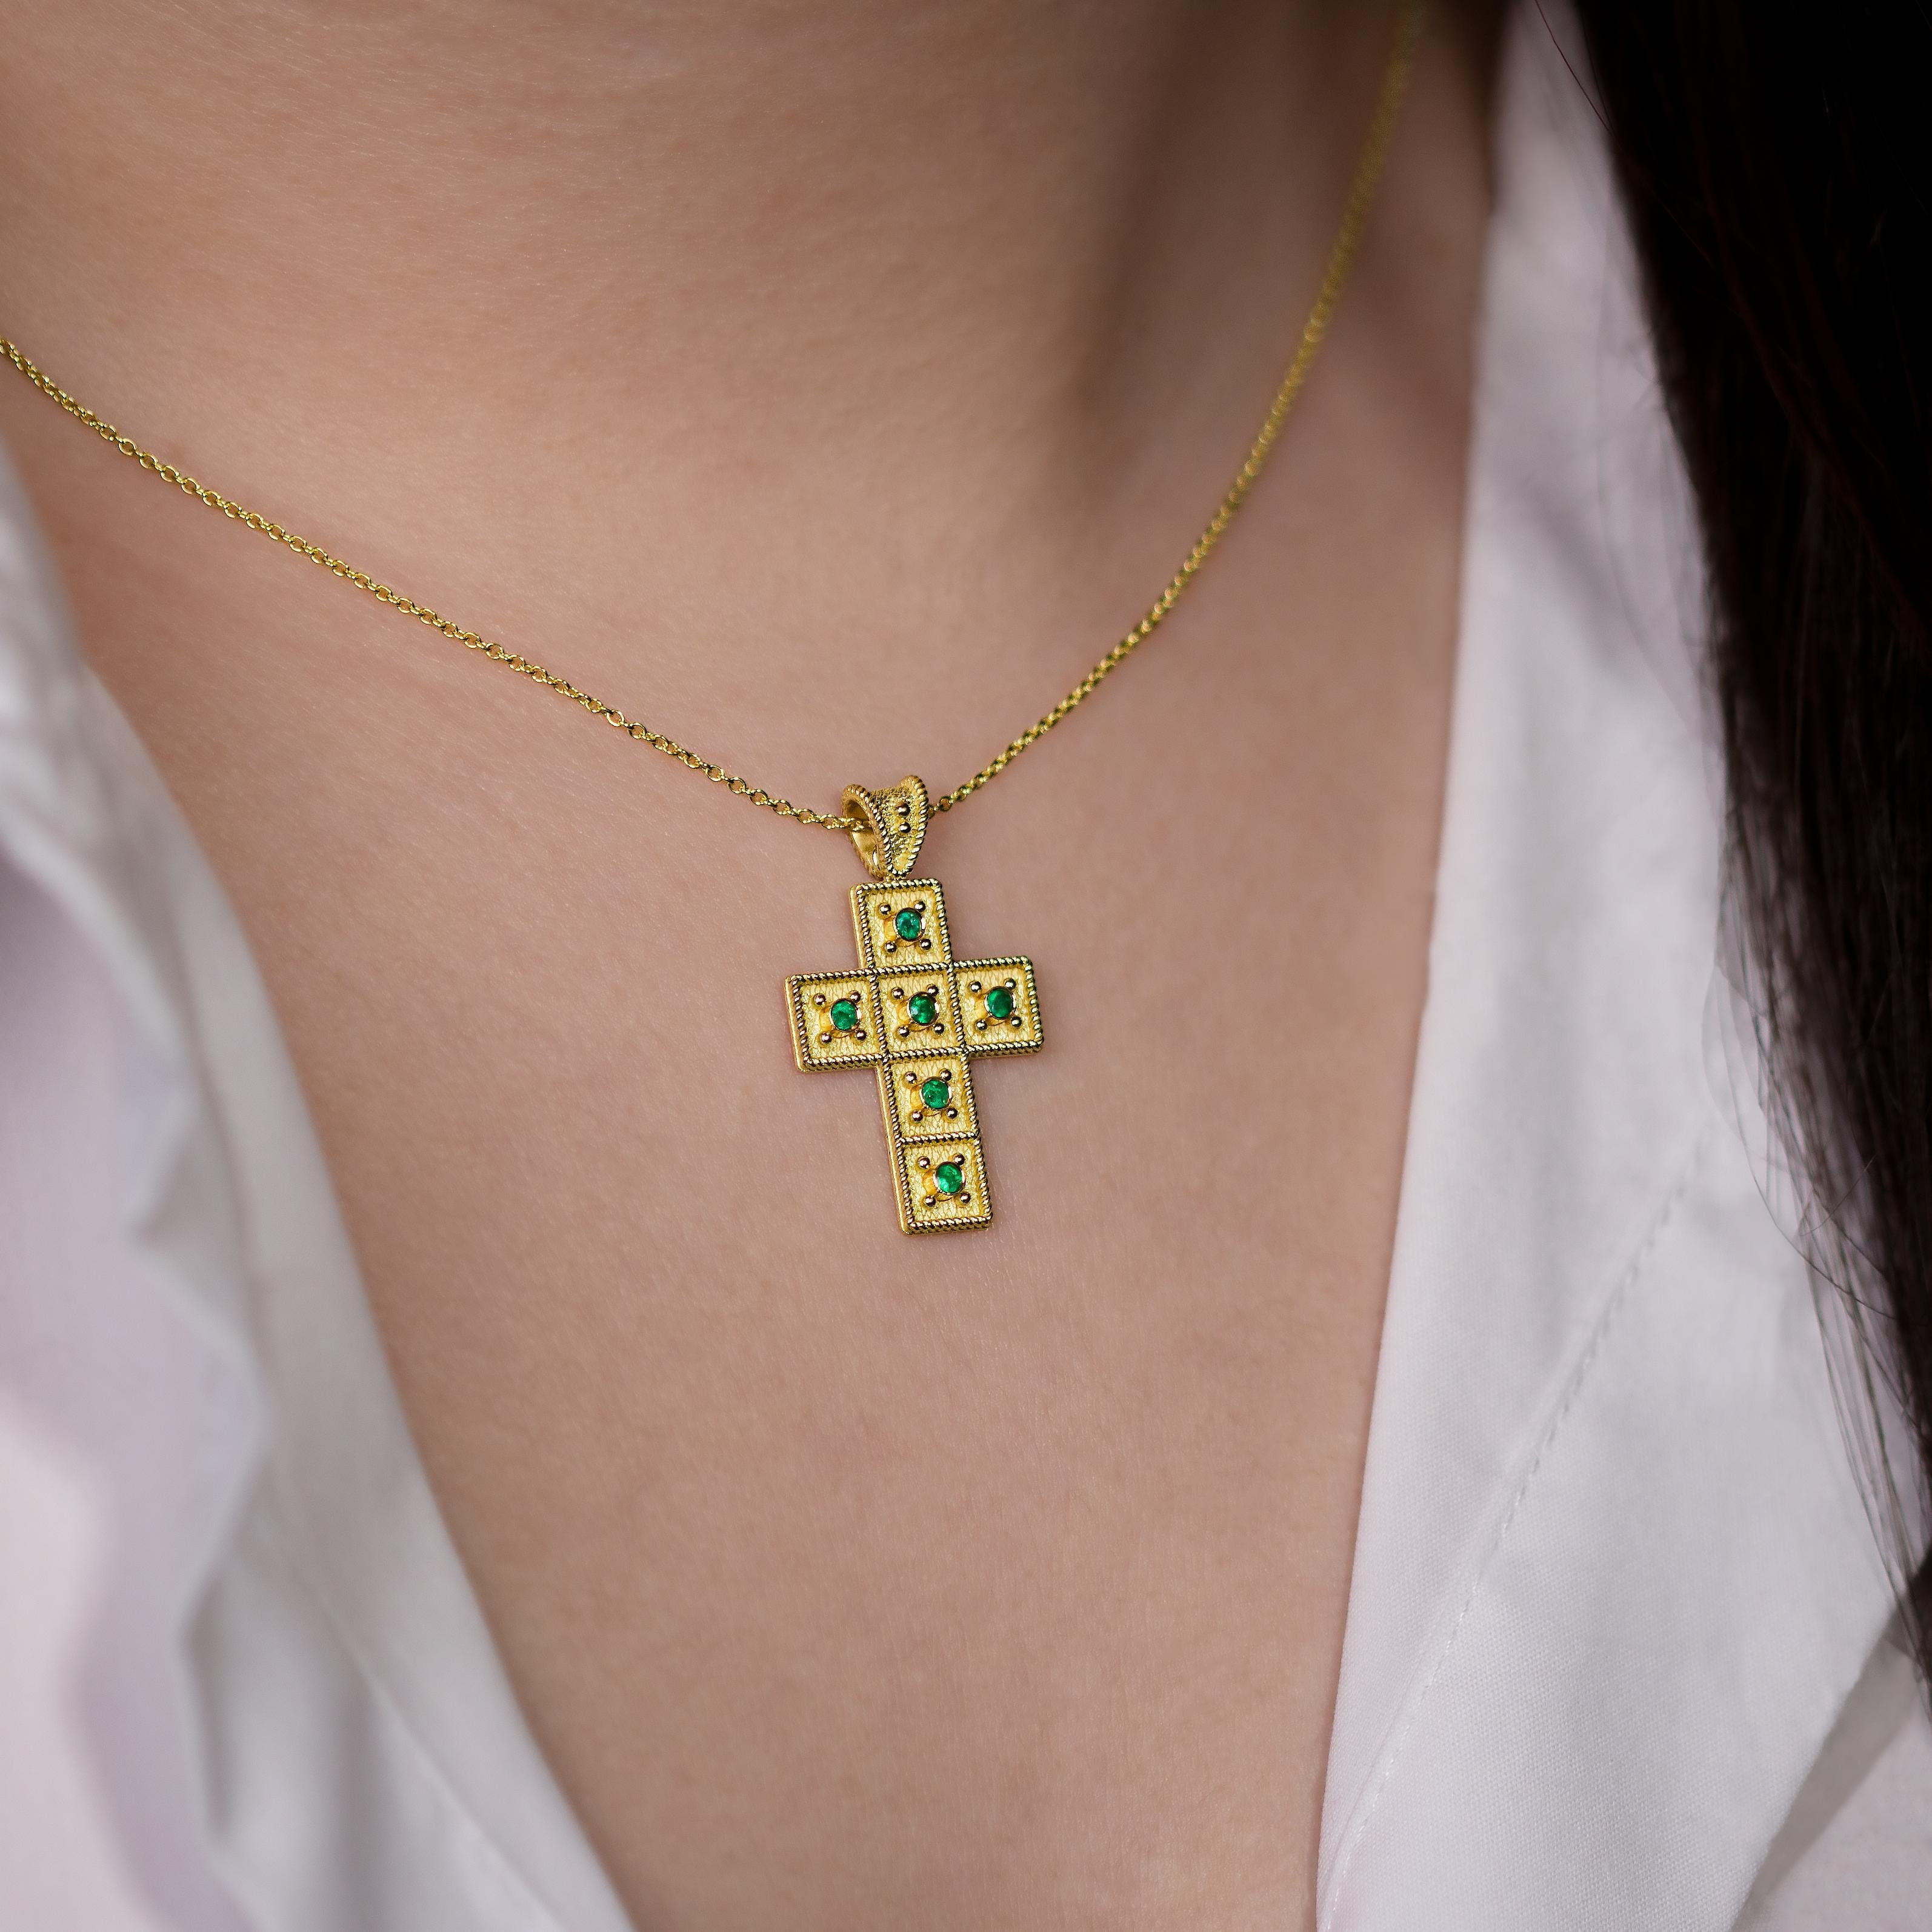 This exquisite gold cross pendant is framed by intricate golden rope detailing, and gracefully adorned with a constellation of sparkling emeralds, forming a symbol of timeless faith and opulent charm that captivates the heart.

100% handmade in our